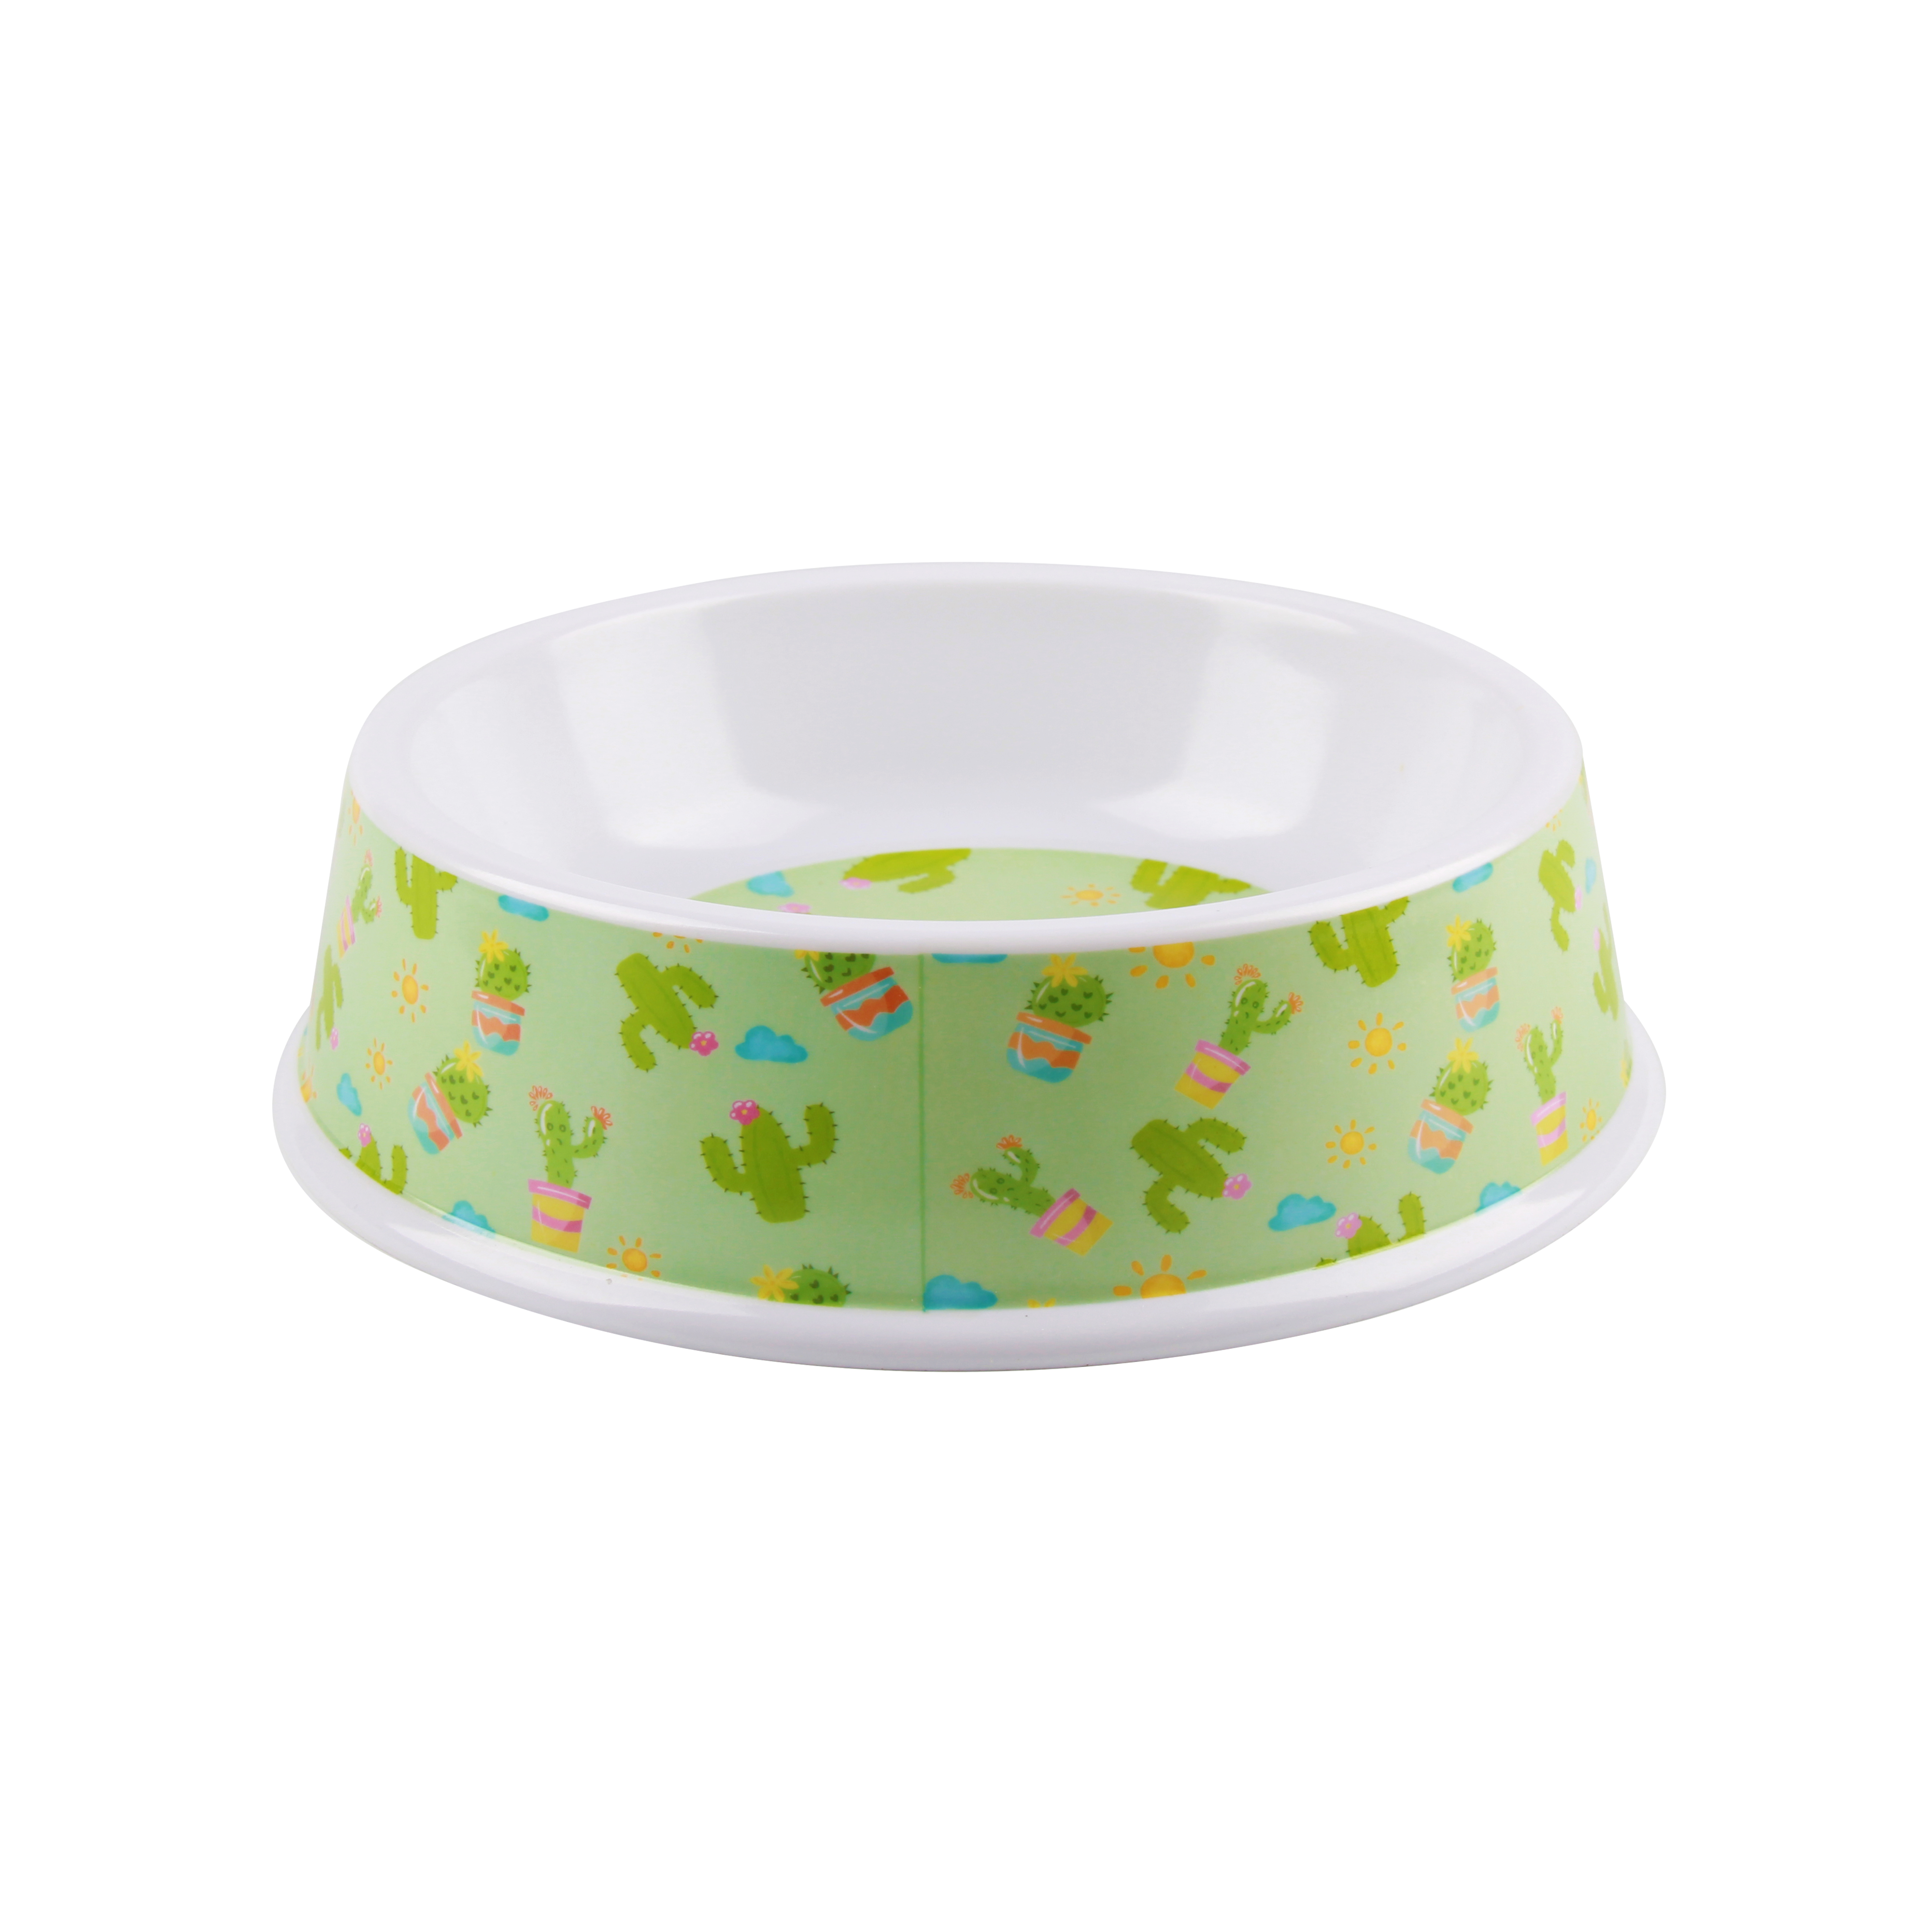 New Arrival China Agencia de importaciones de Yiwu - Pattern Melamine Pet Bowl Wholesale from China 2021 – Sellers Union